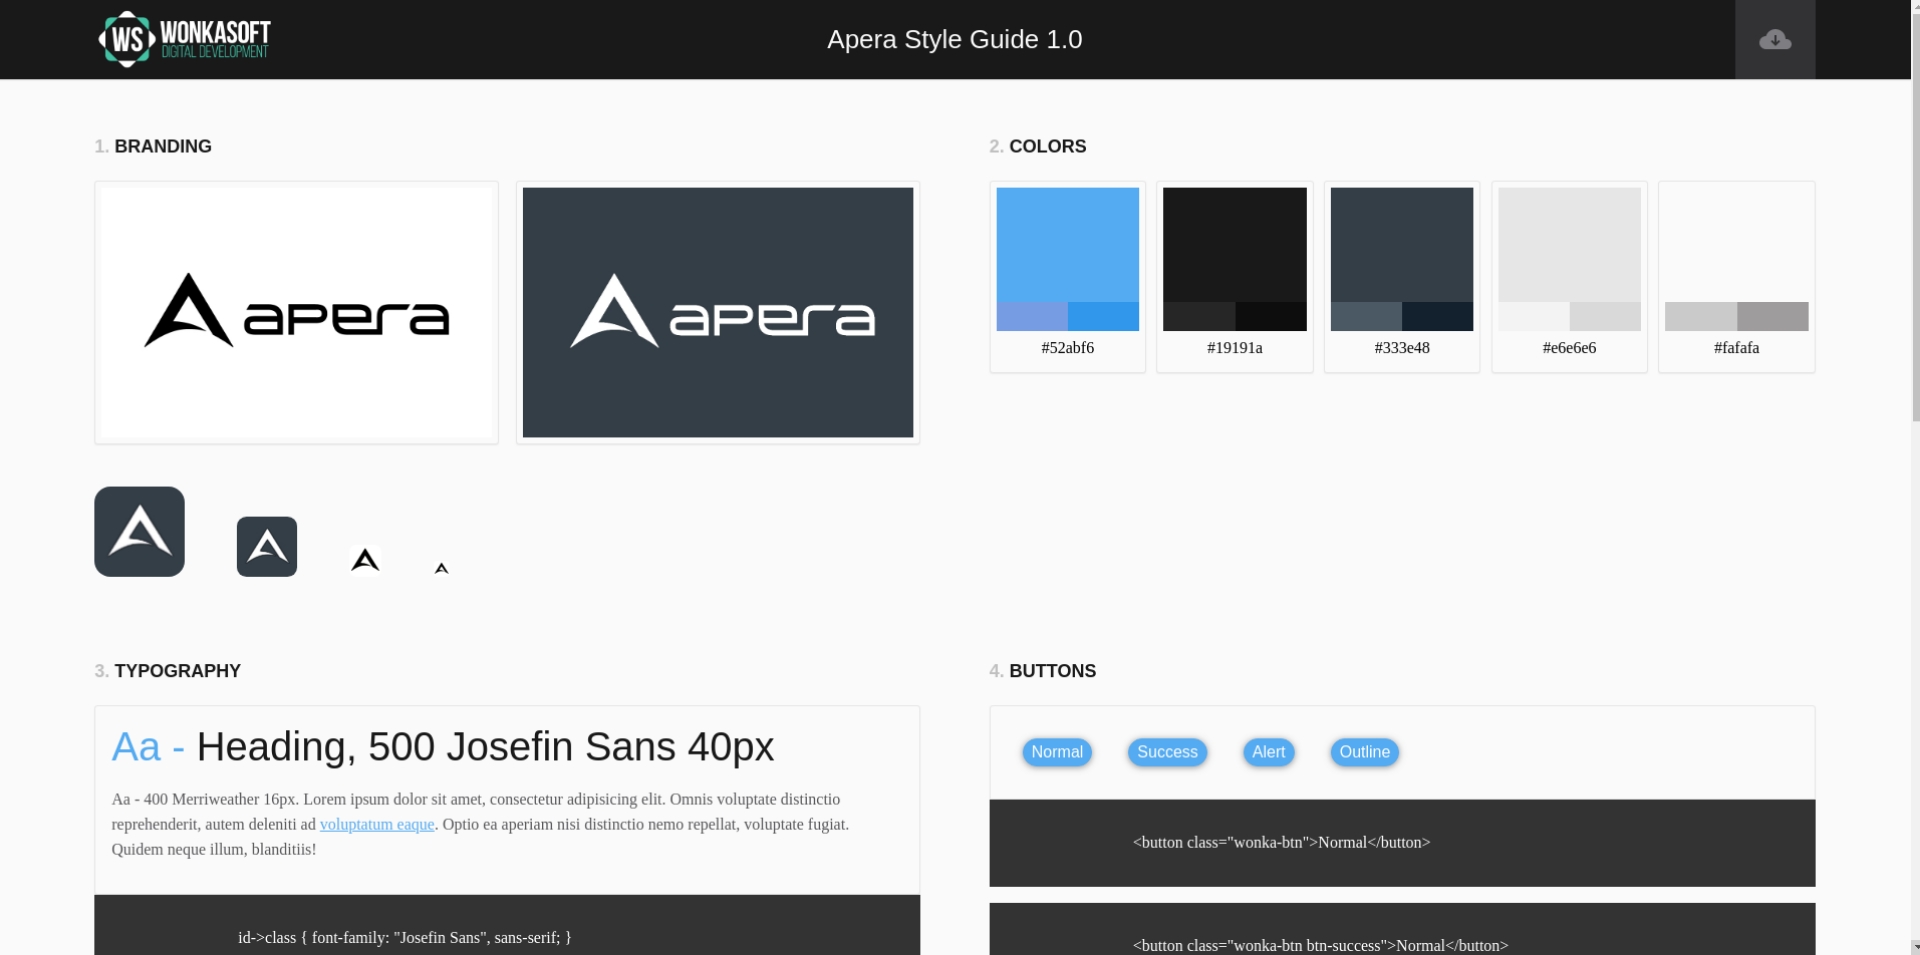 Apera Style Guide Image